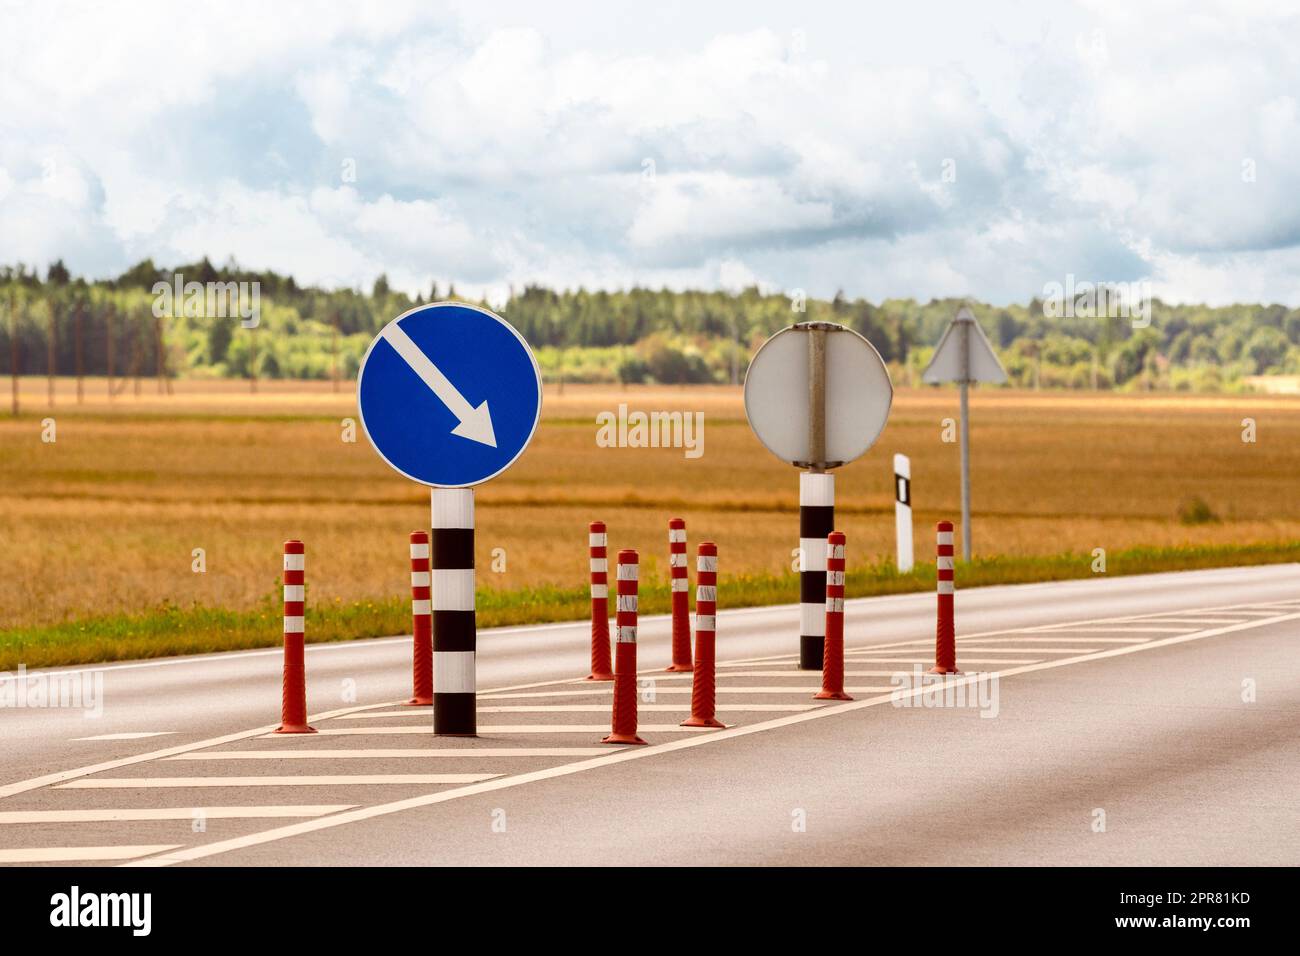 Orange cones and road signs for traffic control on the highway Stock Photo